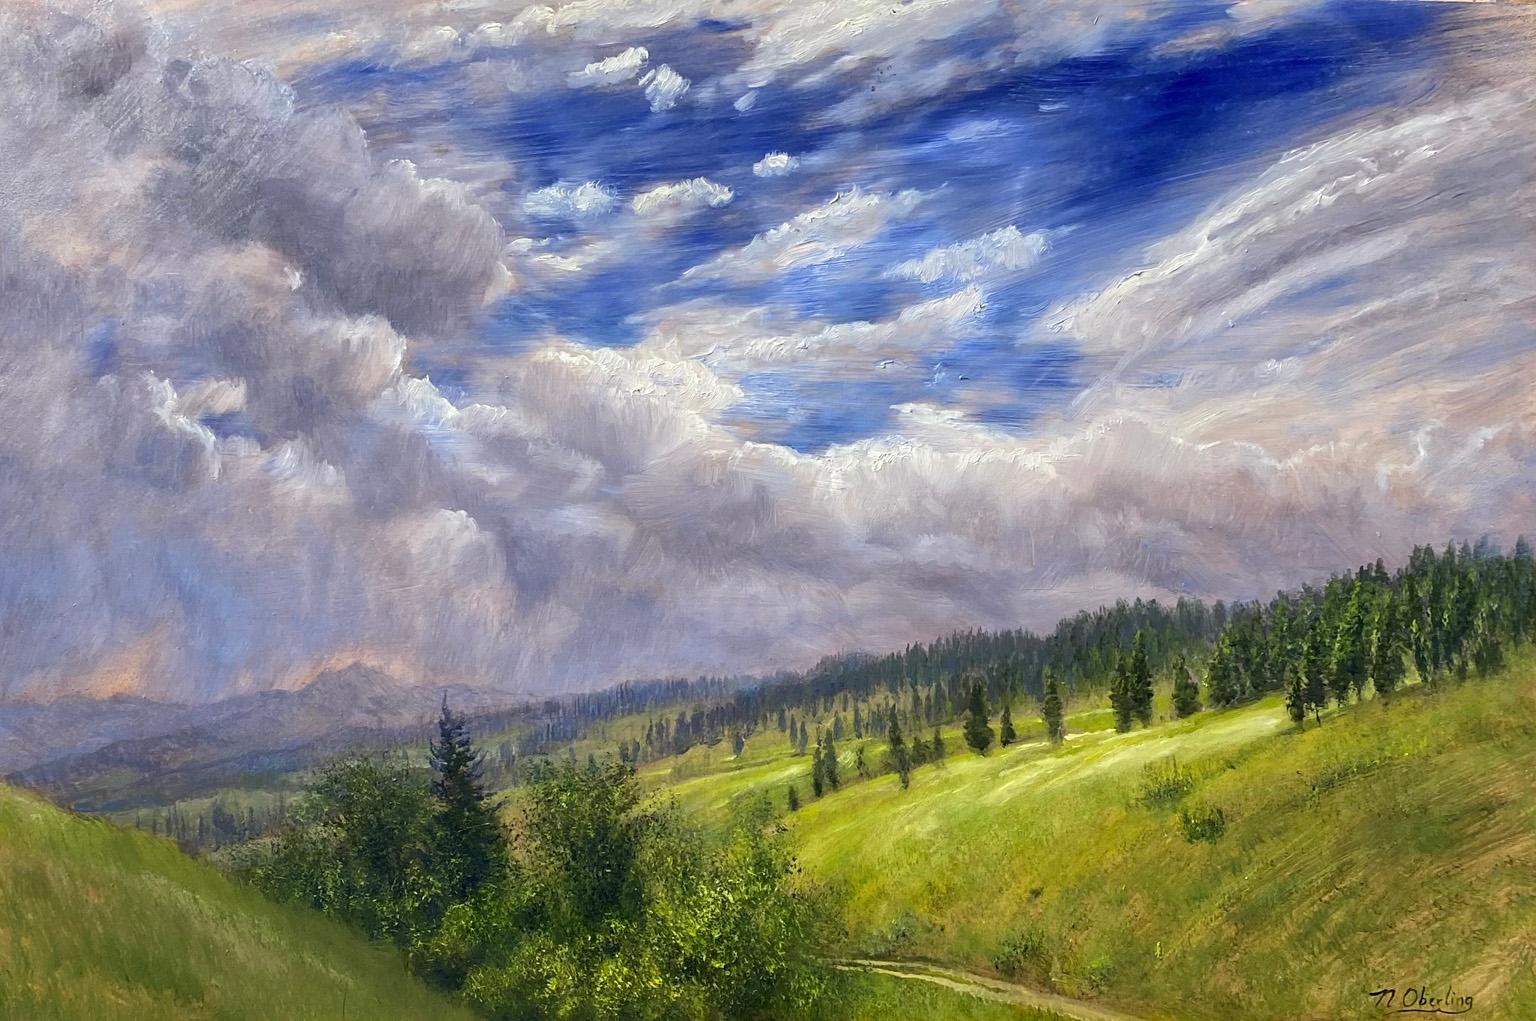 Nicholas Oberling Landscape Painting - End of a Gallatin Valley Road in Montana